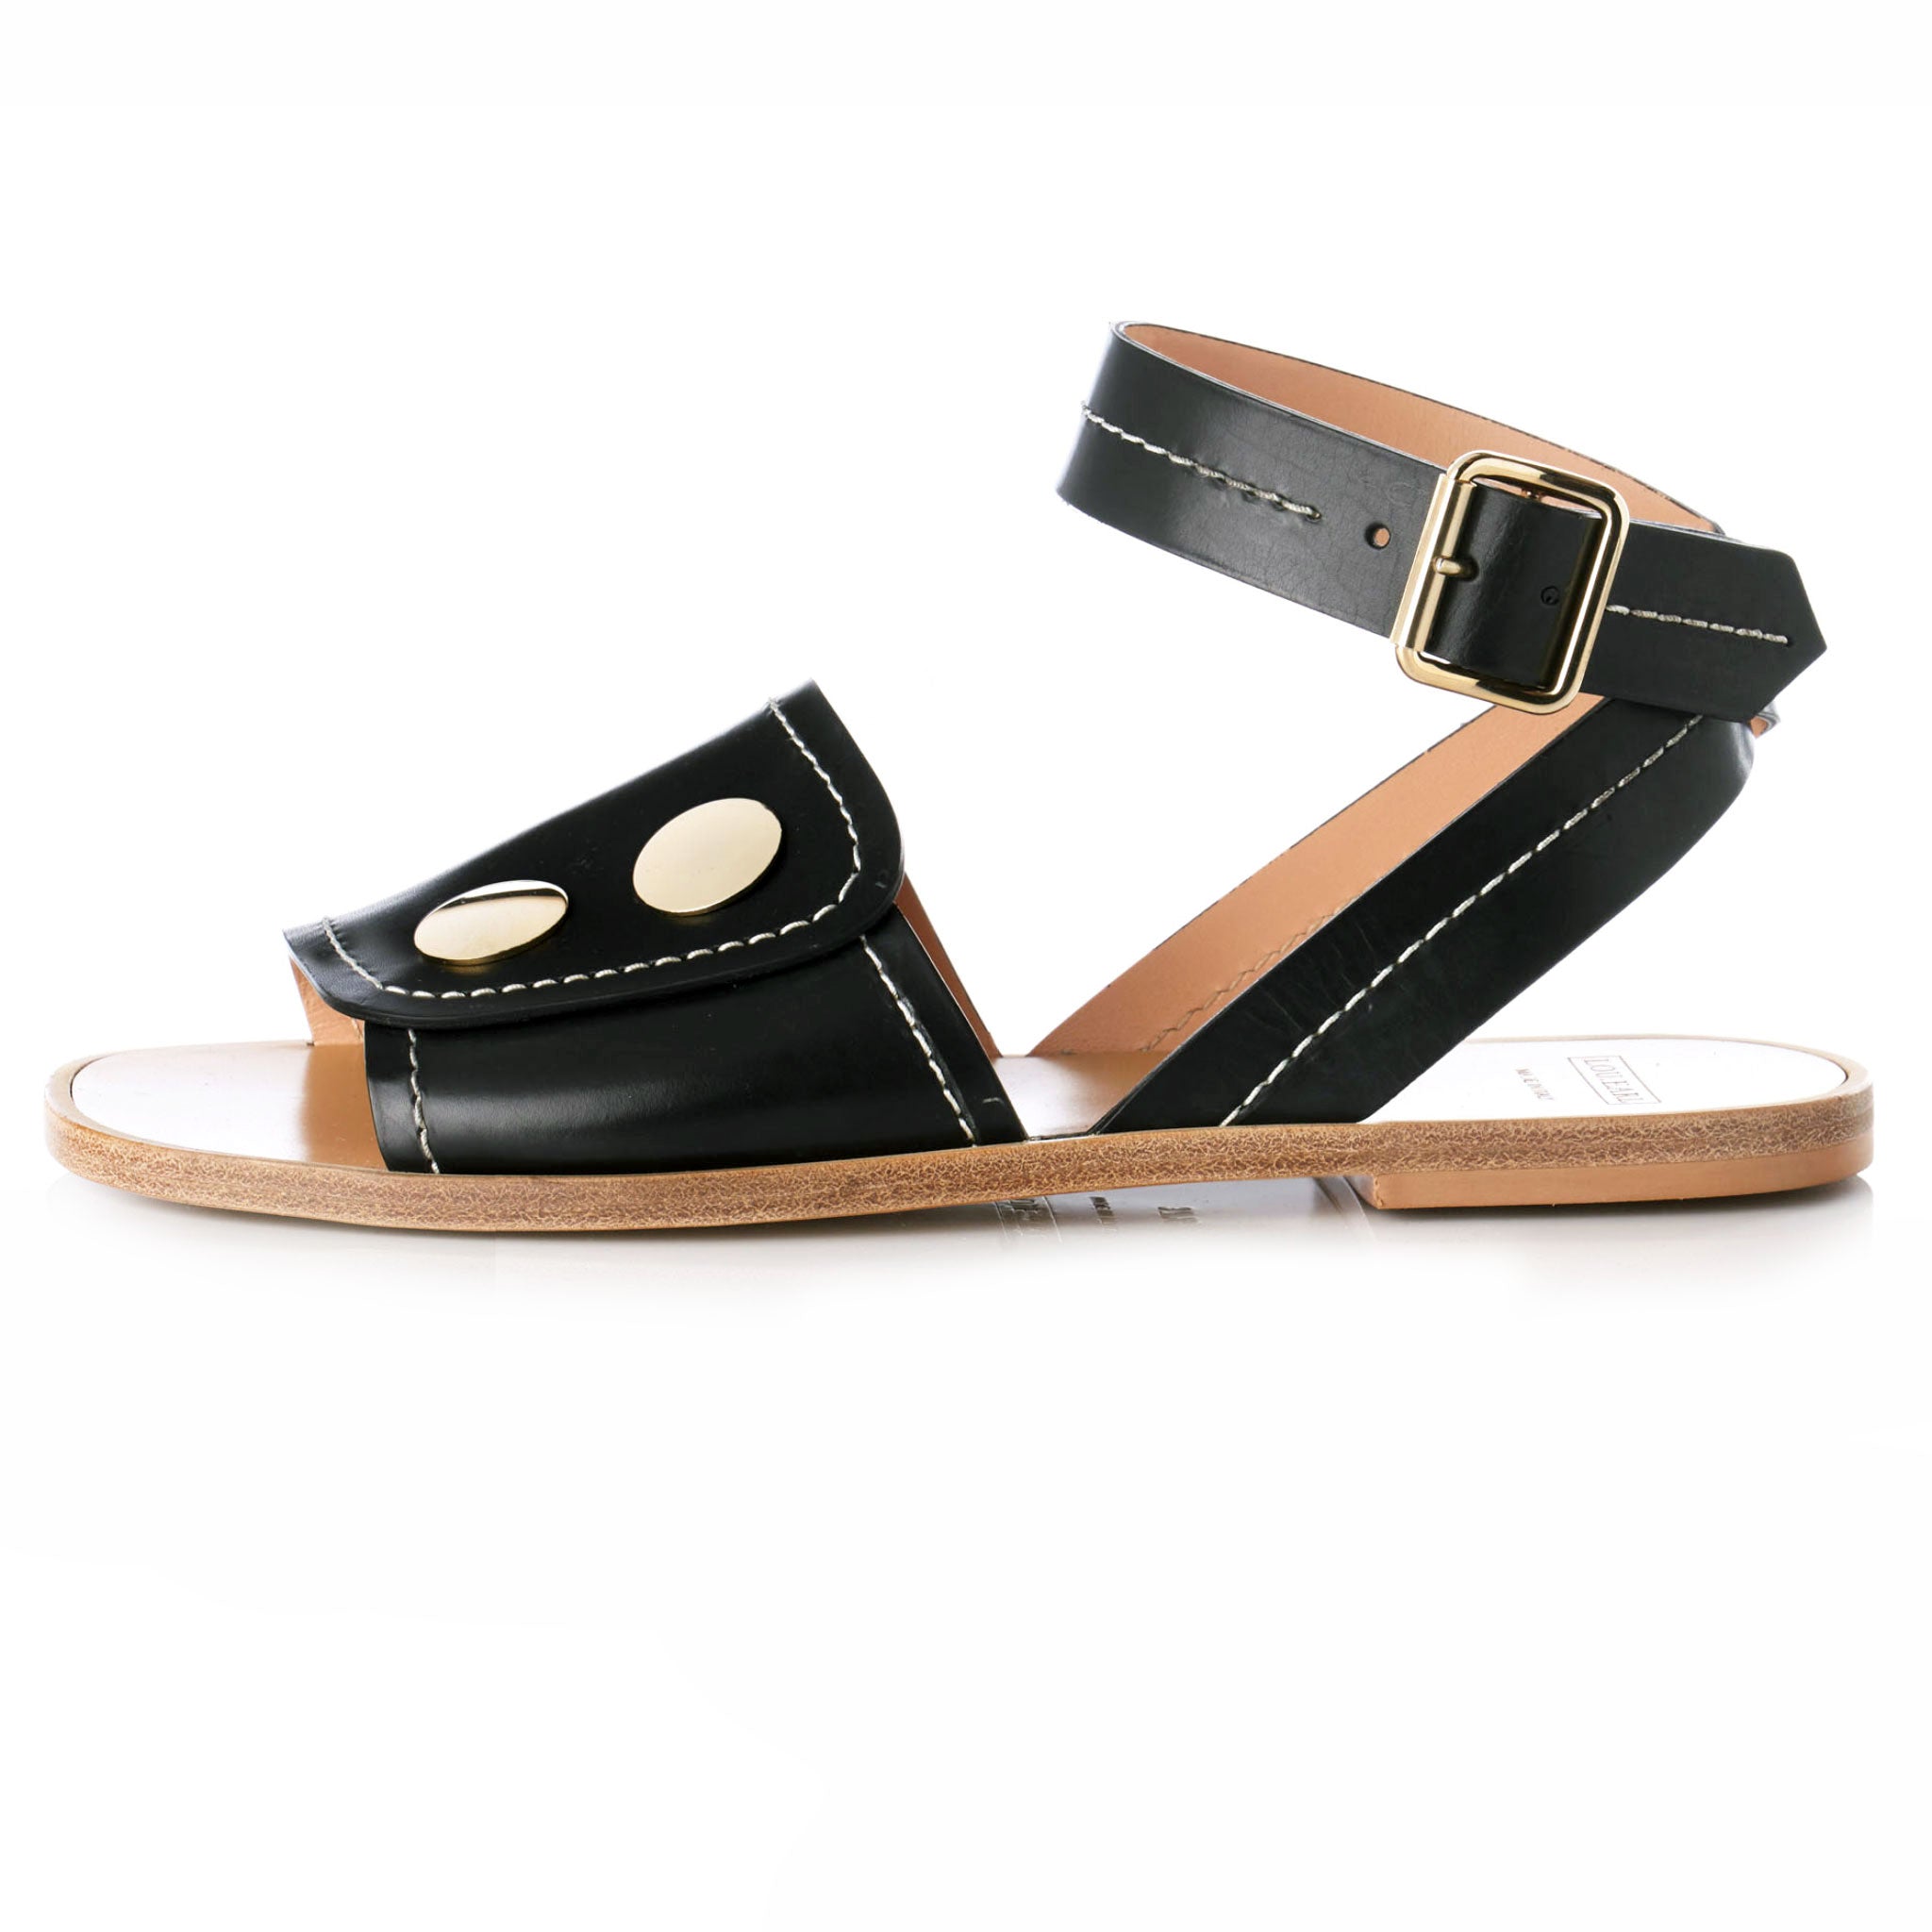 black leather flat sandals for women contemporary fashion with ankle strap